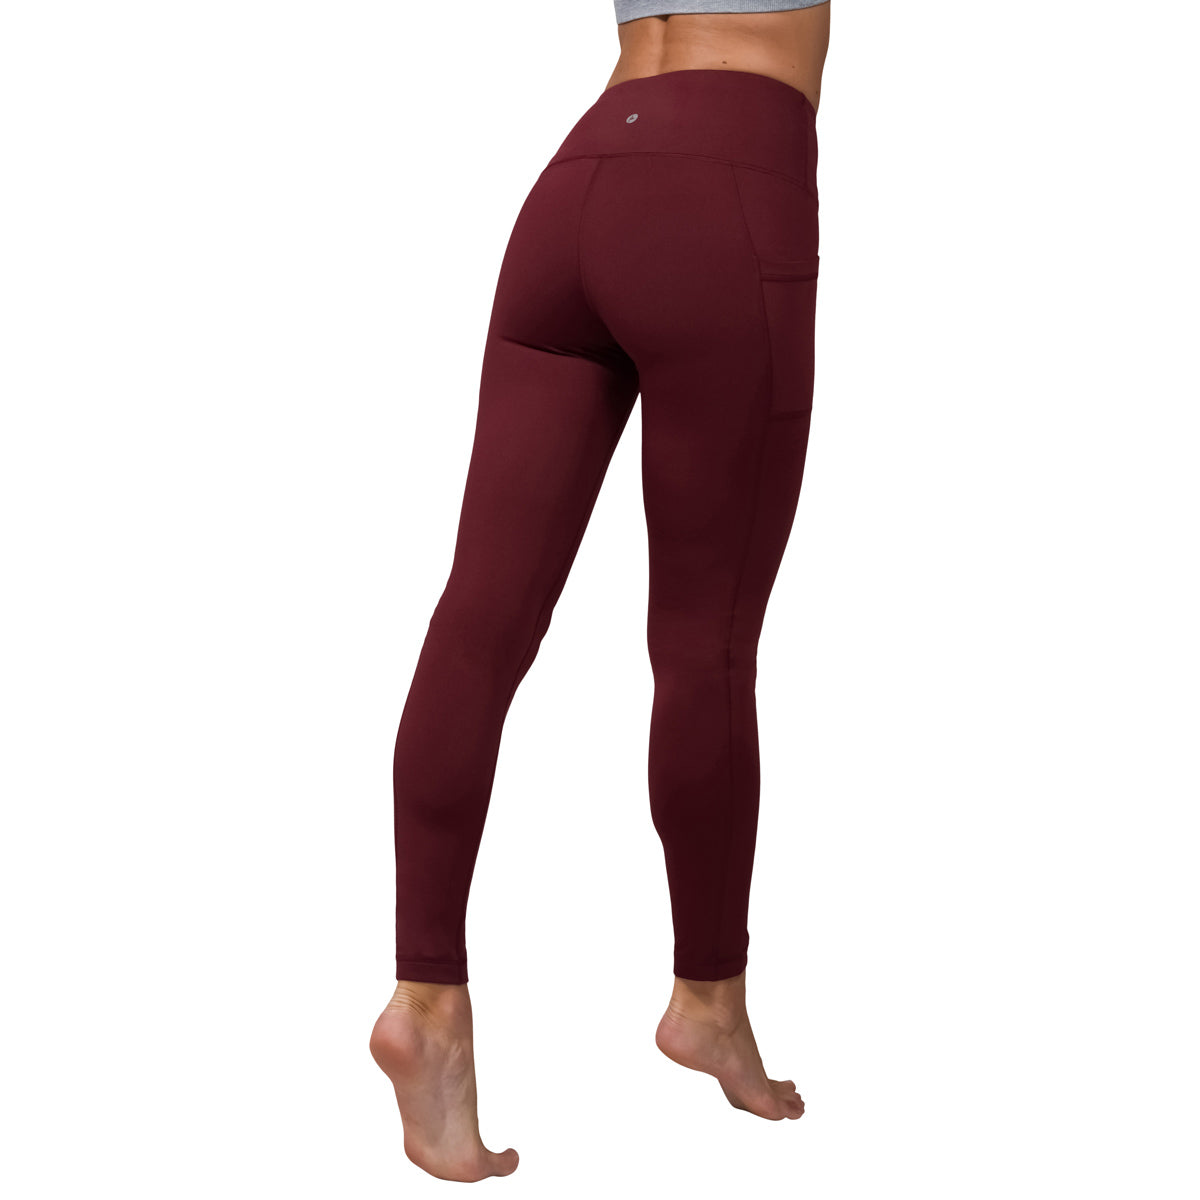 90 Degrees by Reflex Leggings Pink Size XS - $12 (33% Off Retail) - From  paulina